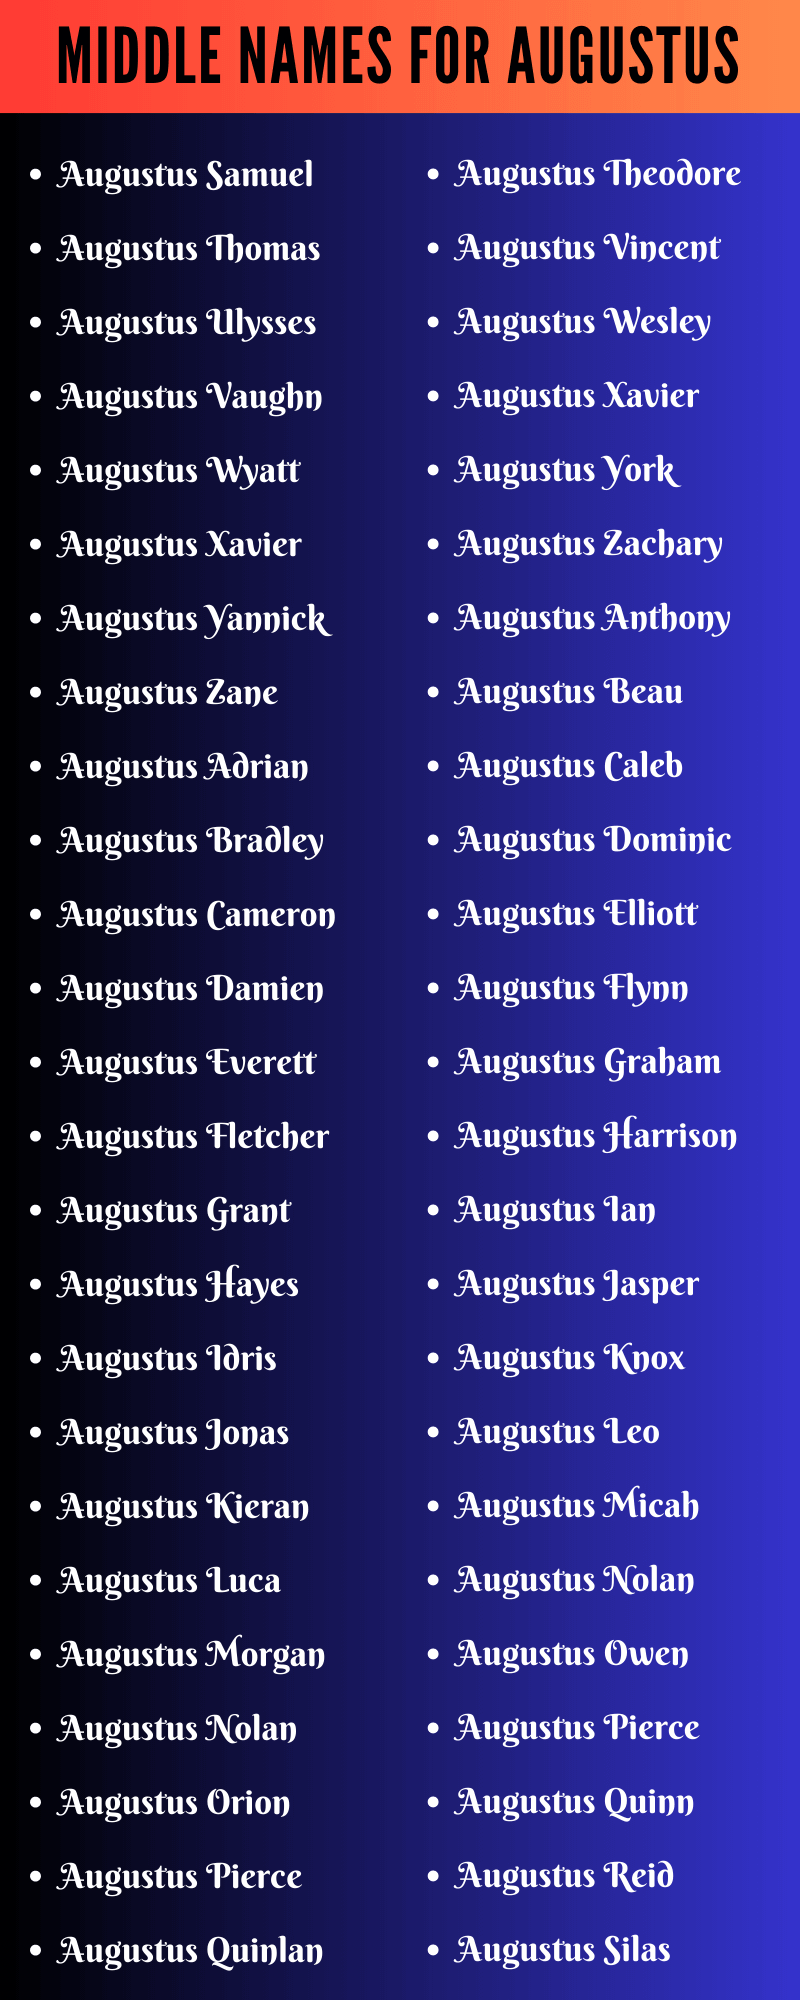 Middle Names For Augustus